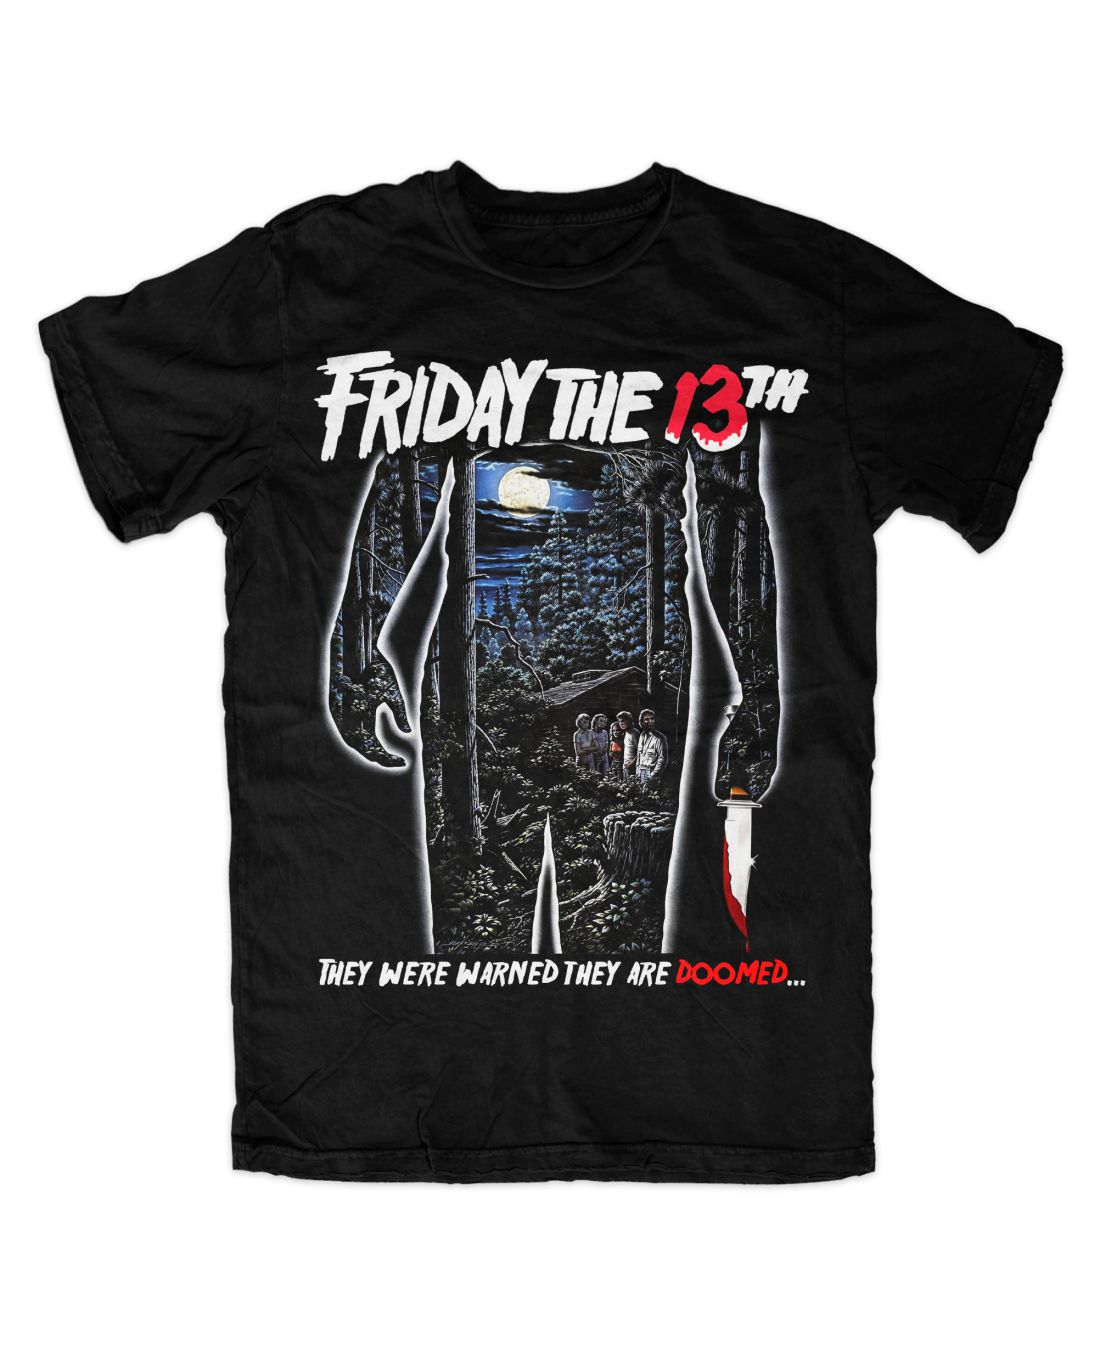 Friday The 13th 001